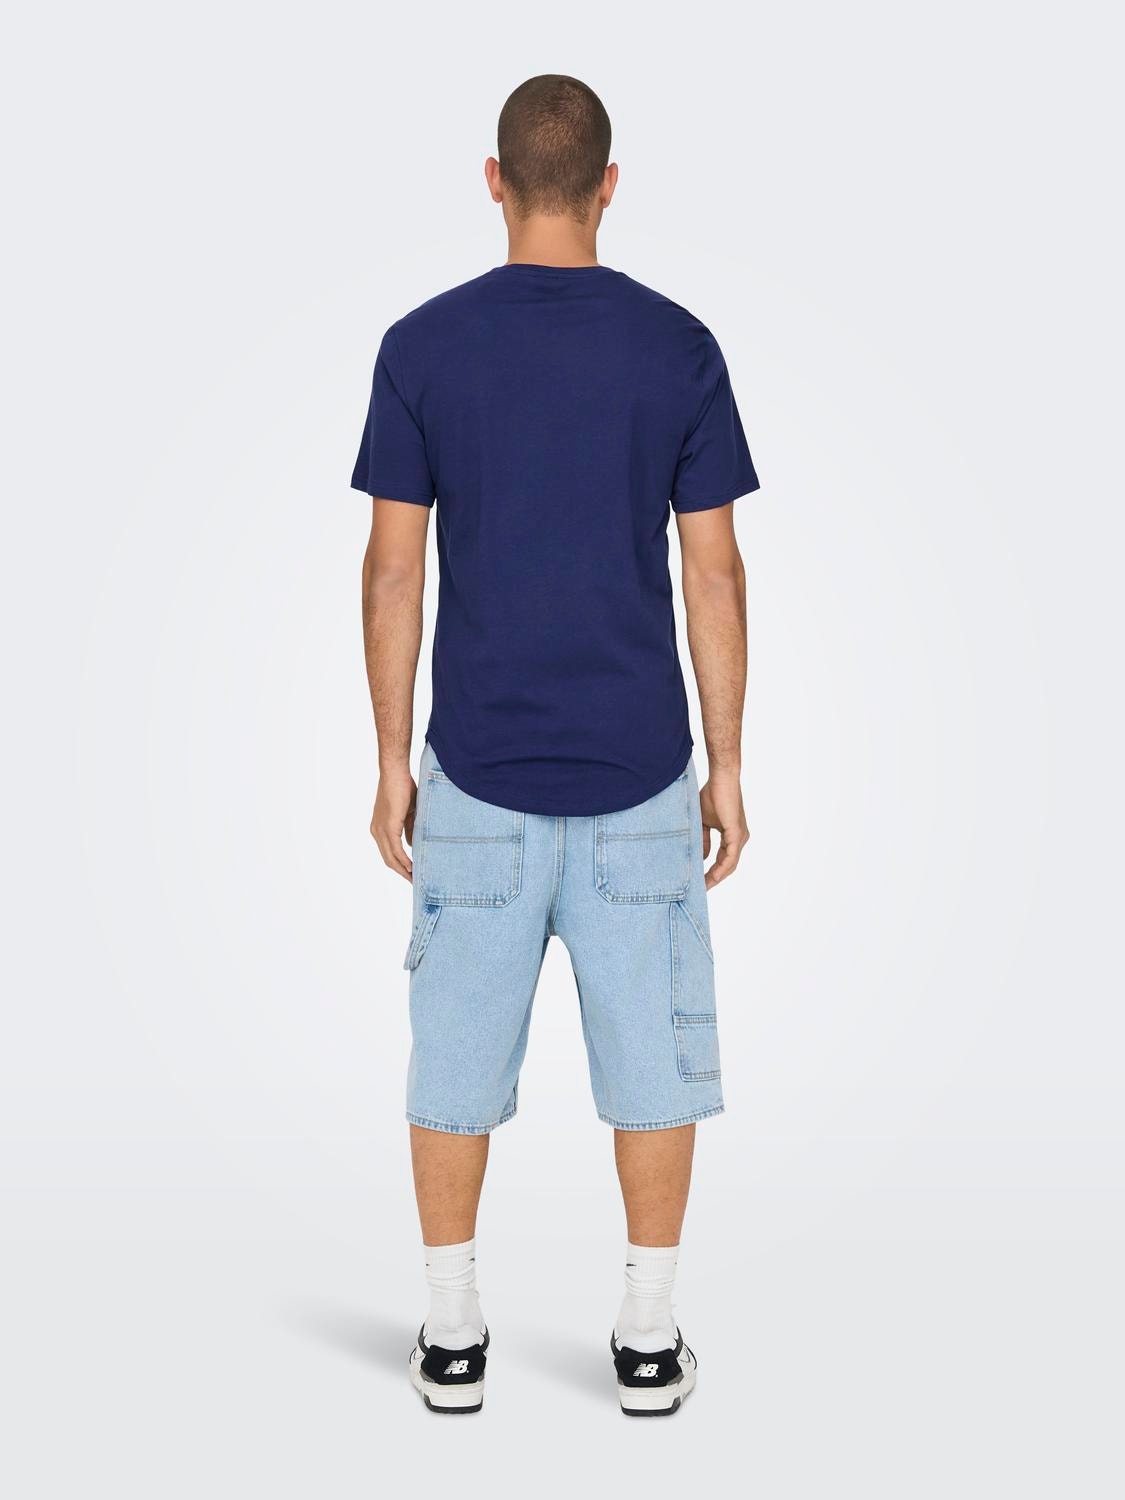 ONLY & SONS Long Line Fit Round Neck T-Shirt -Beacon Blue - 22002973